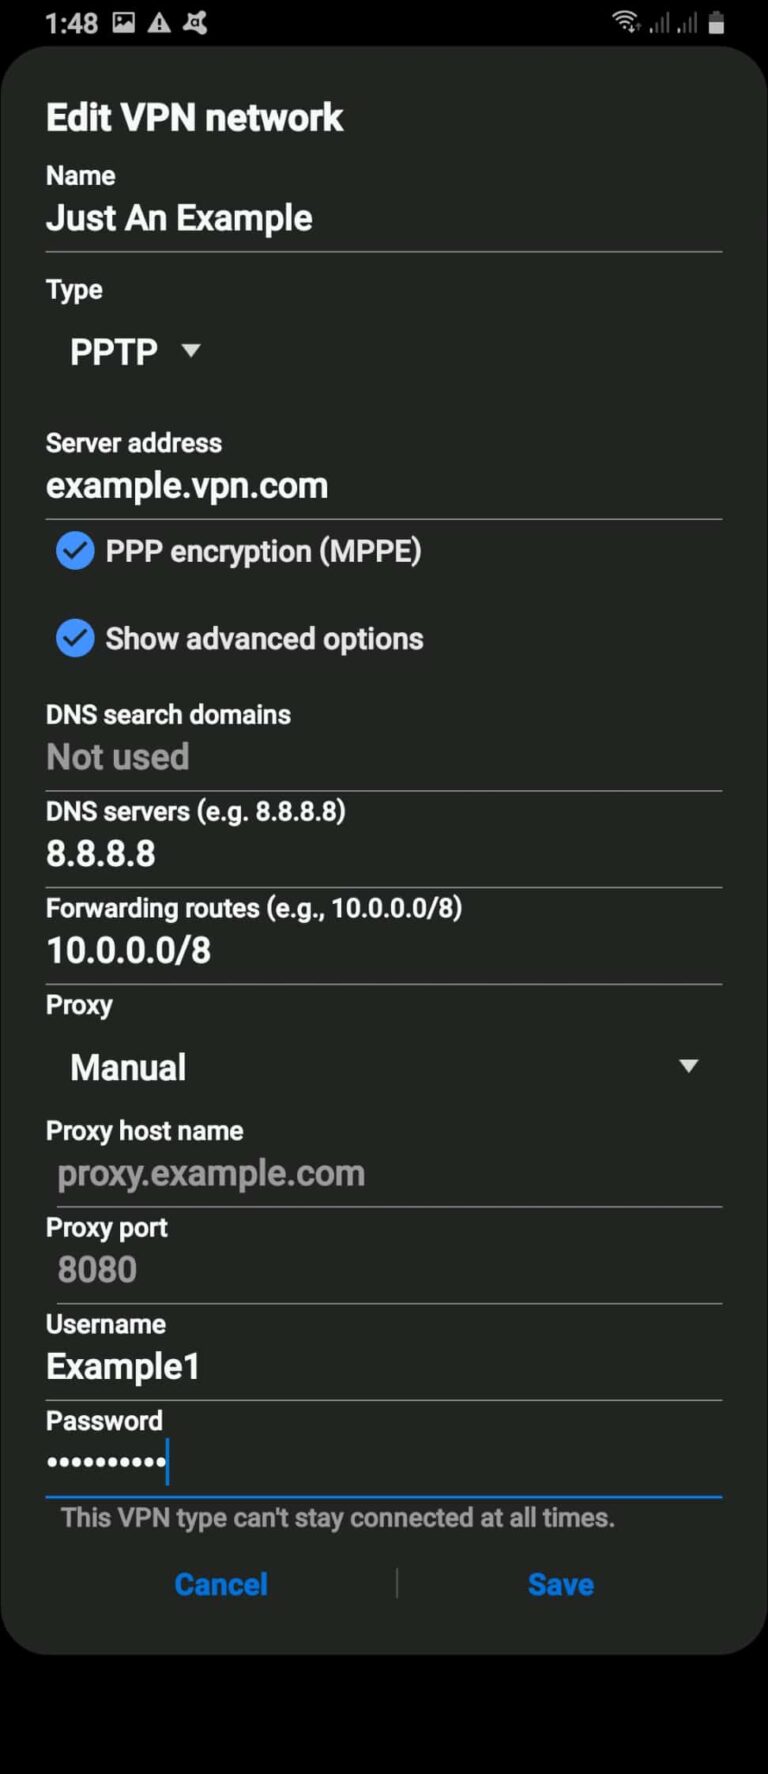 Should I enable VPN on my phone?